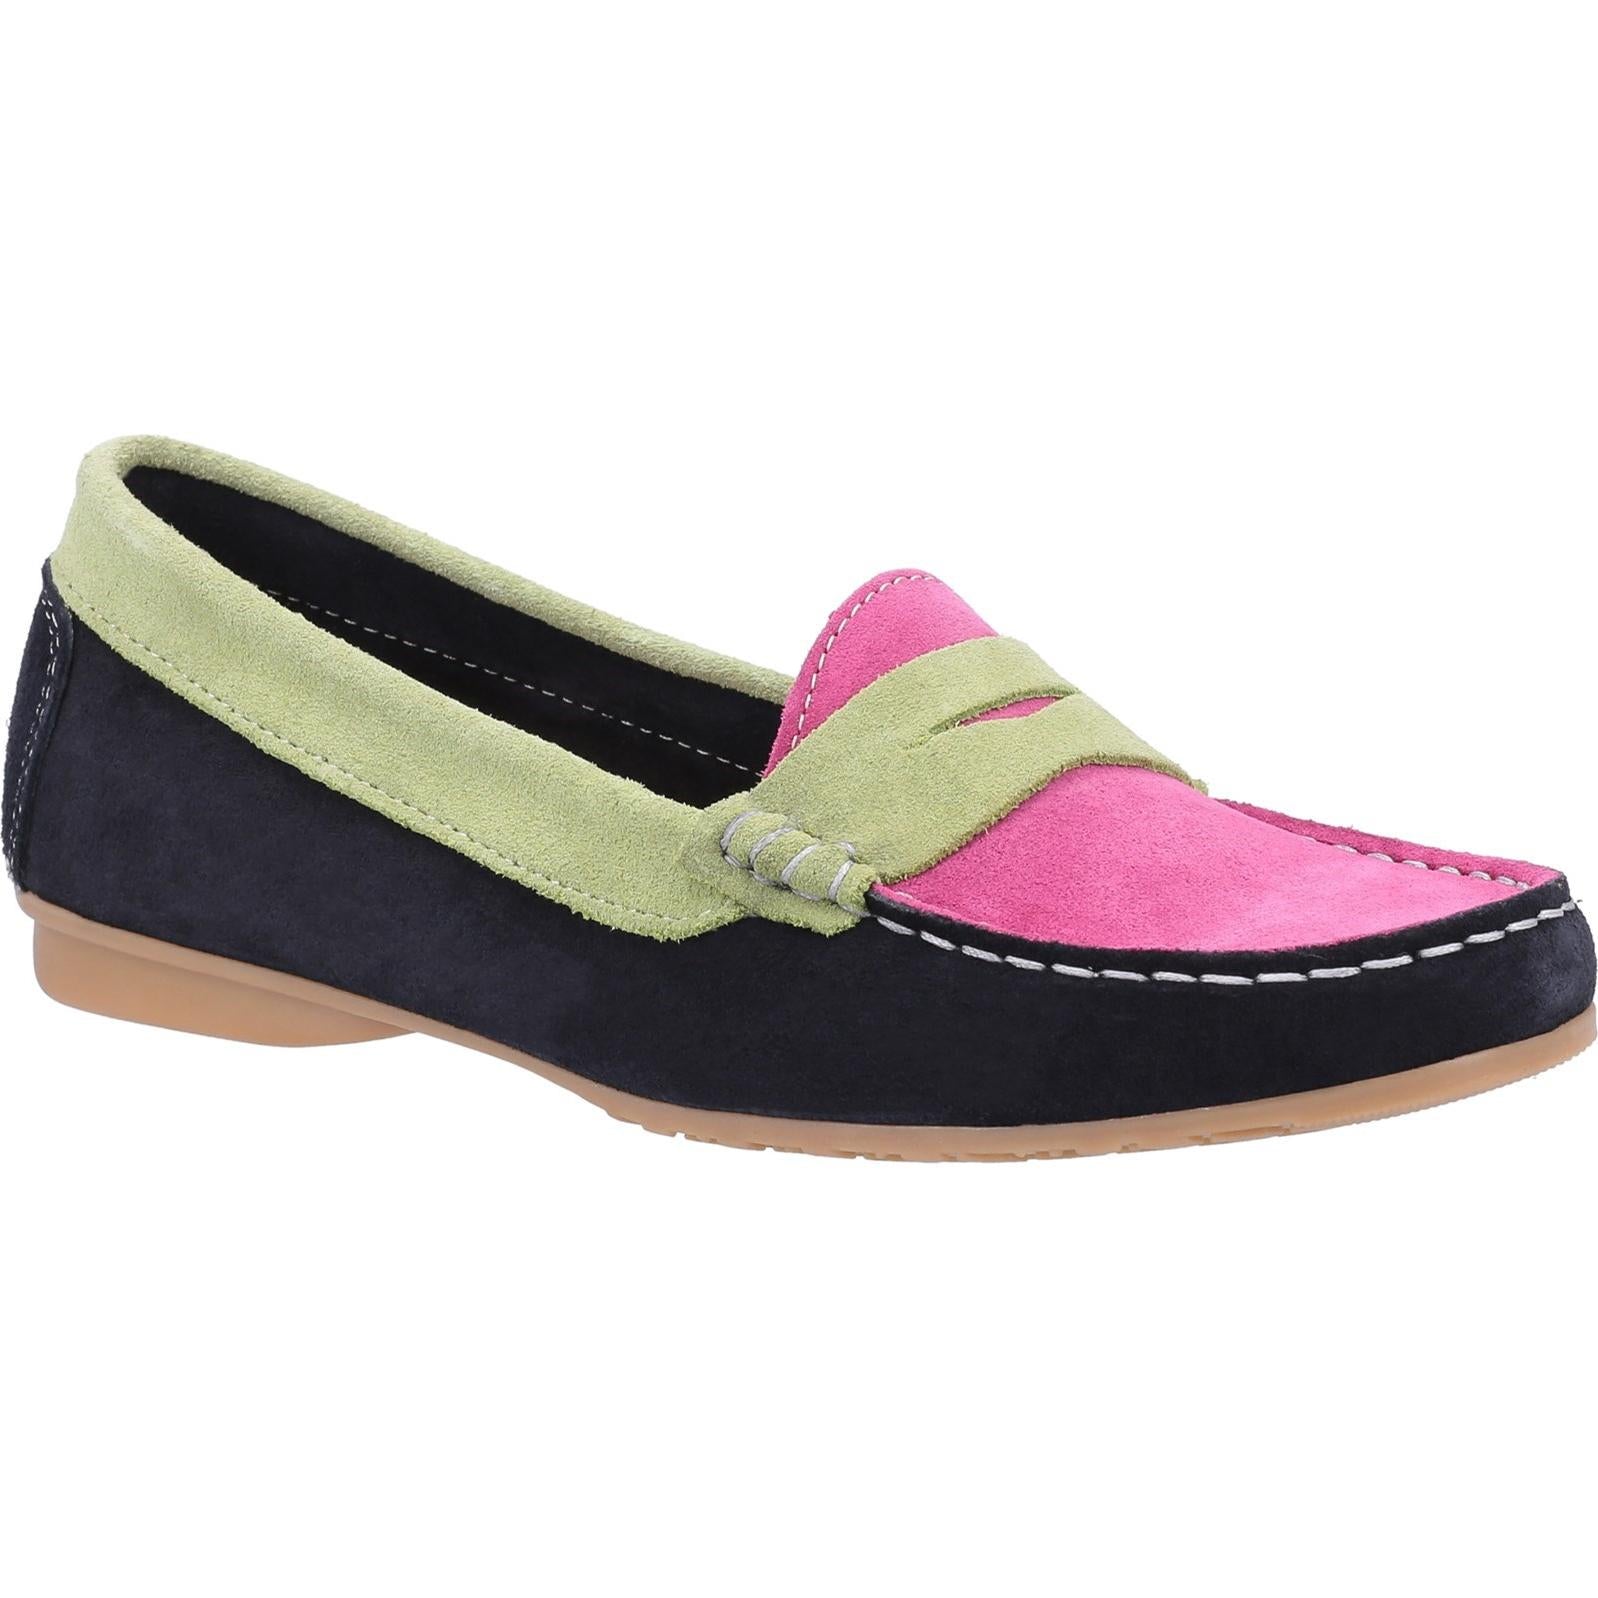 Riva Banyoles Moccasin with Tassel Flats